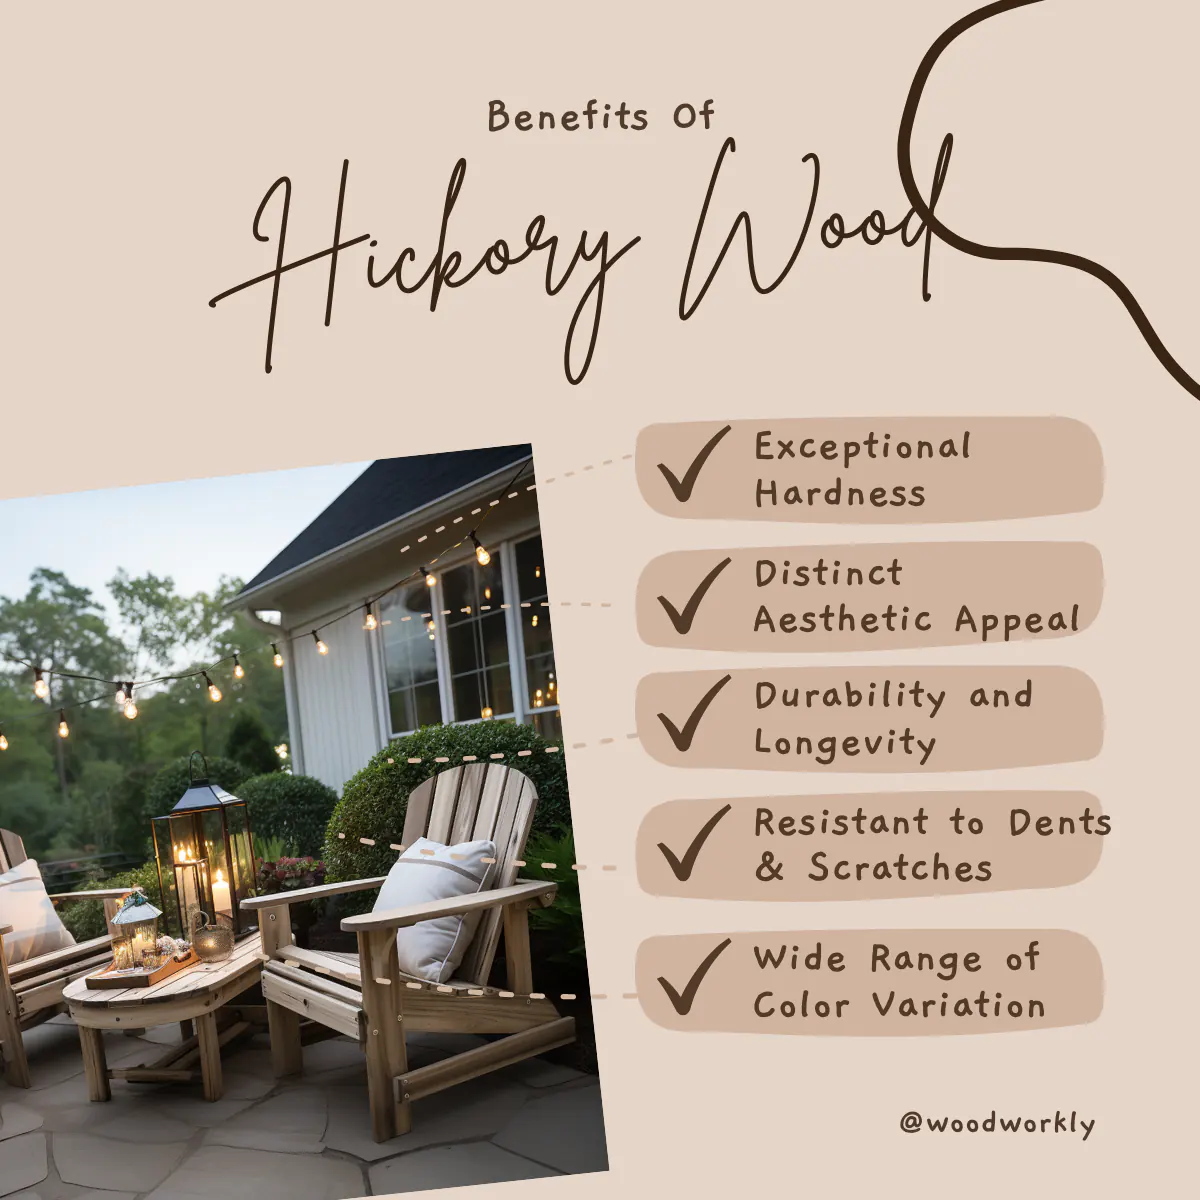 Benefits of Hickory wood